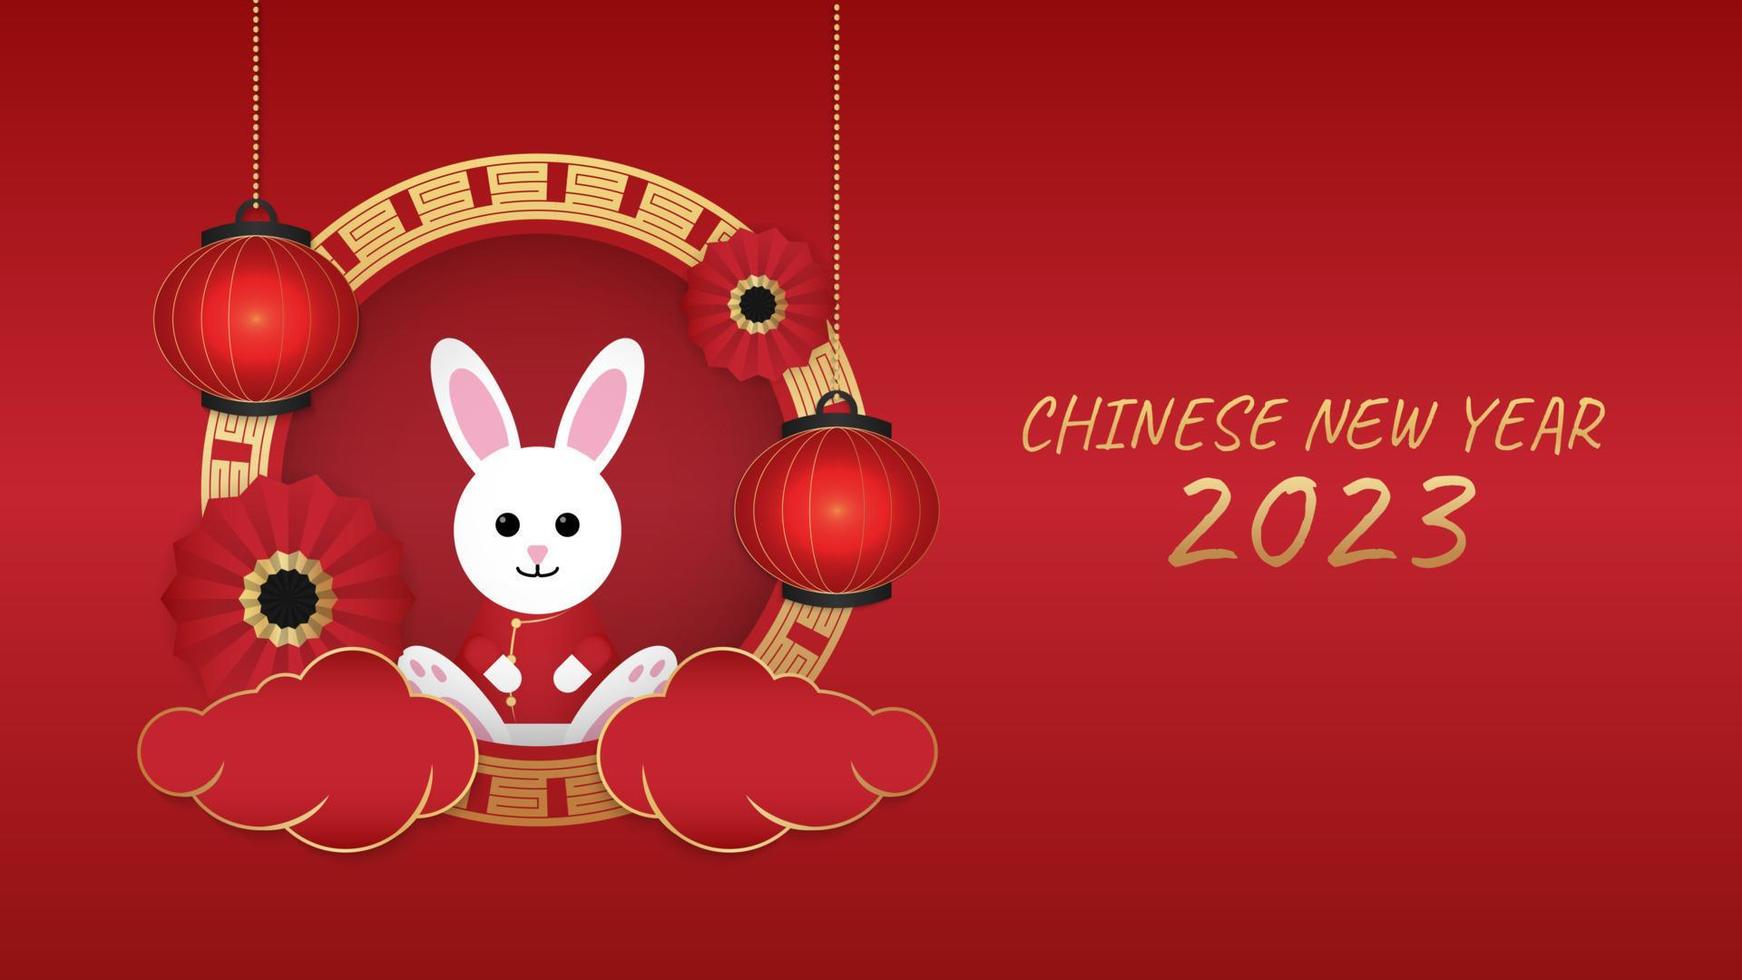 Chinese new year 2023 greeting background vector